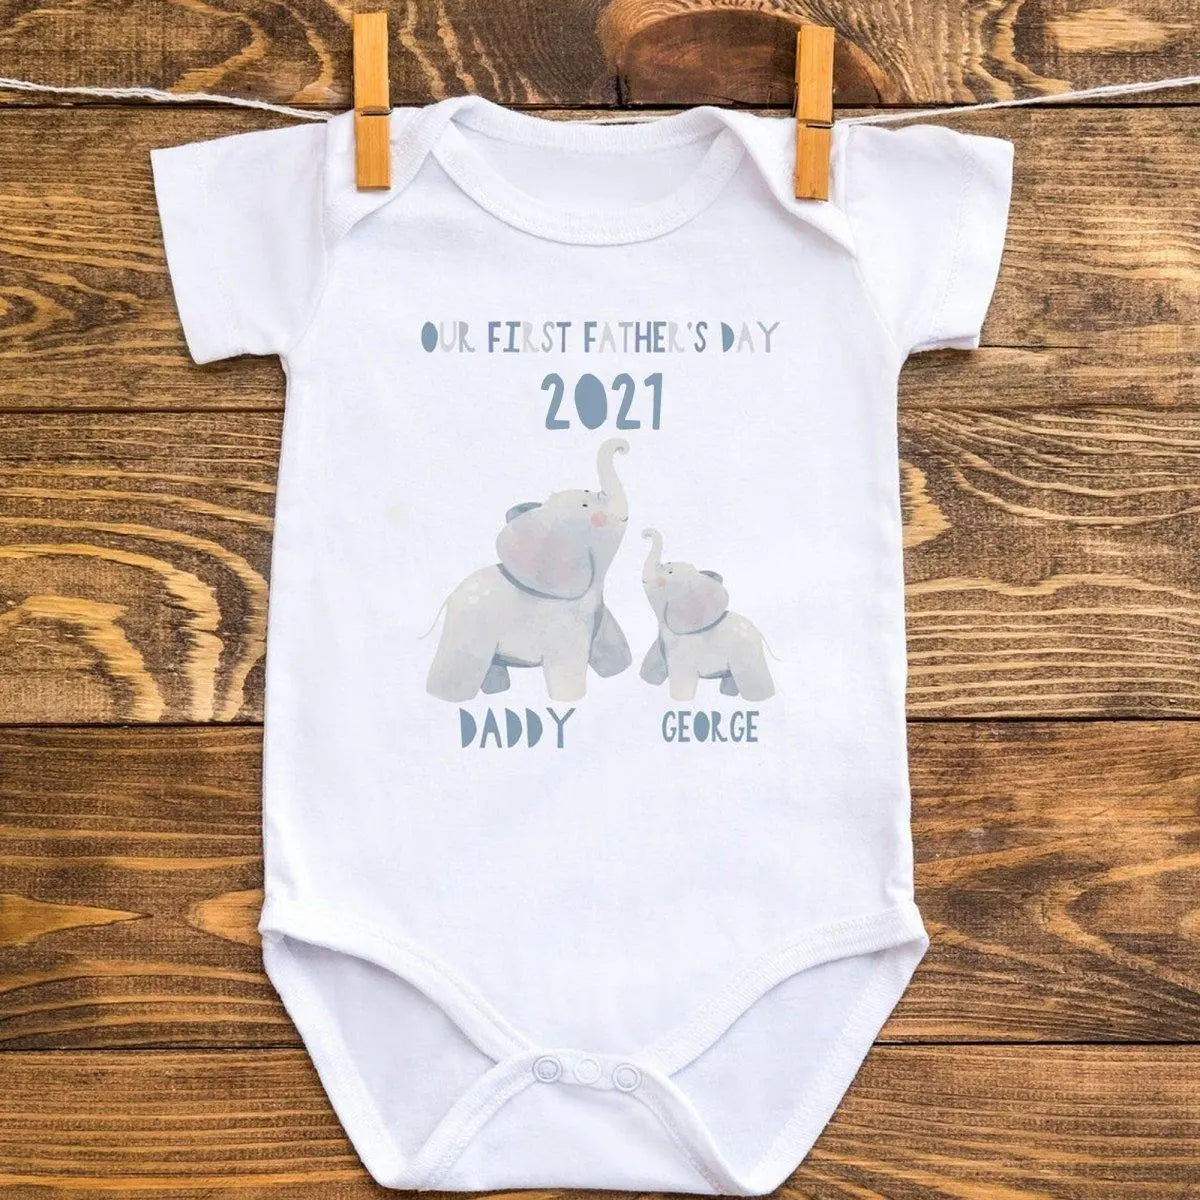 Personalised First Fathers Day Baby Vest, First Fathers Day Gift, First Fathers Day Bodysuit, Personalised Baby Grow Gift, Fathers Day Gift - Amy Lucy